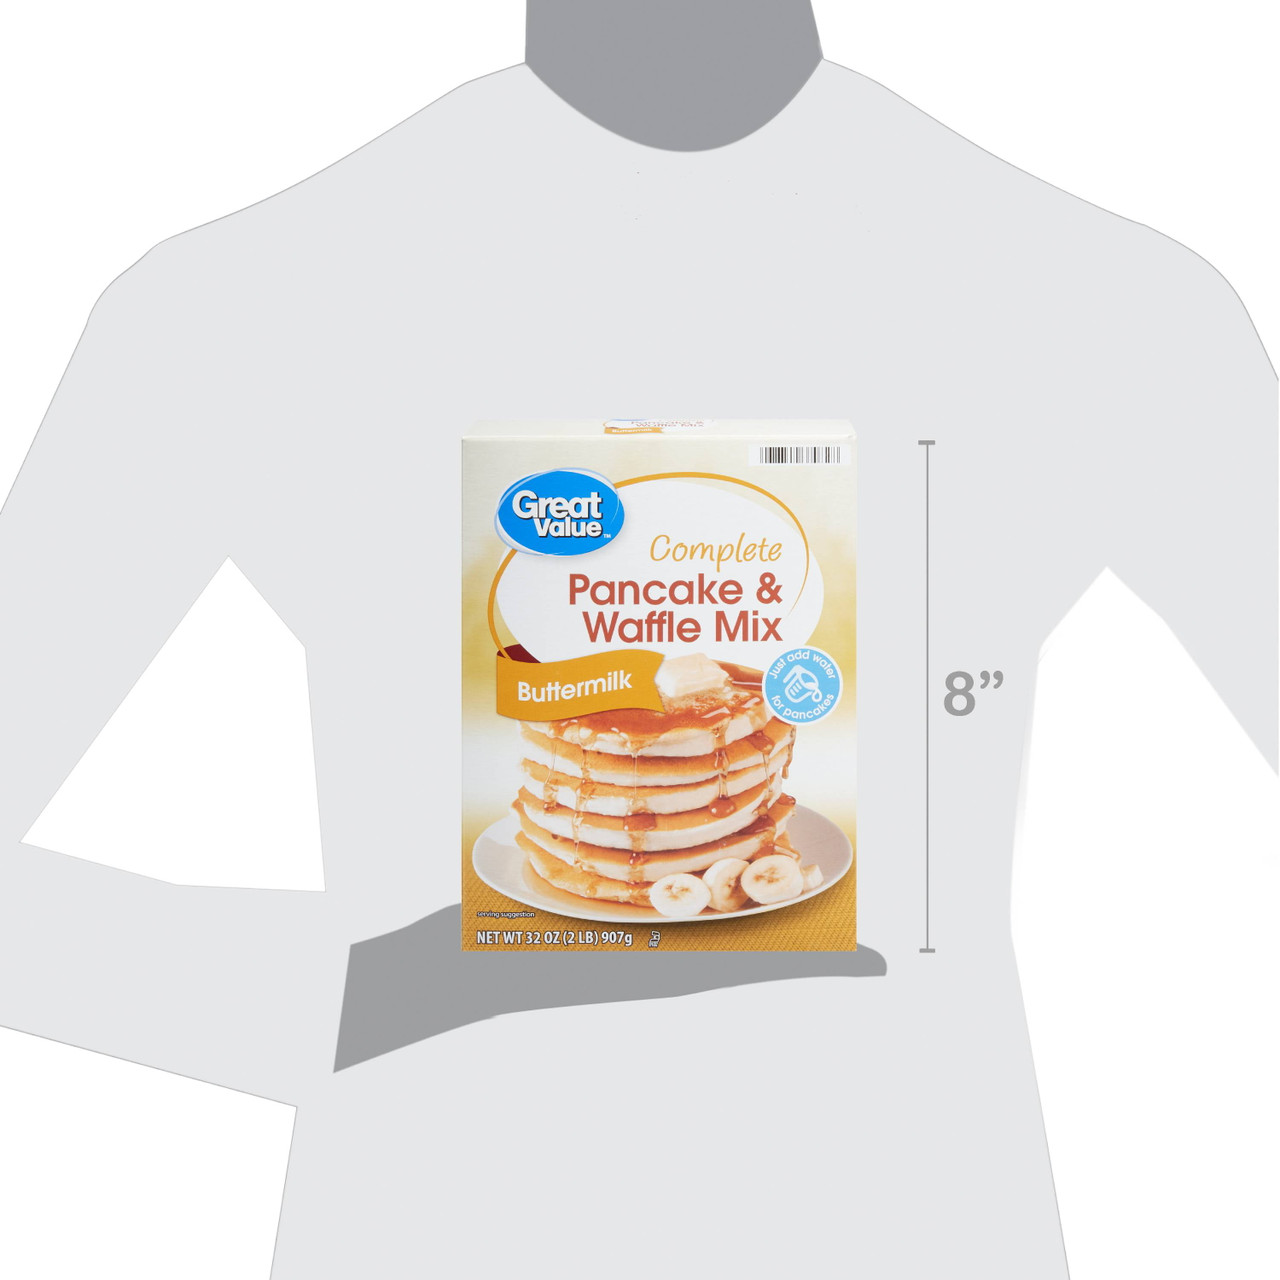 Great Value Complete Pancake & Waffle Mix, Buttermilk, 32 oz - [From 12.00 - Choose pk Qty ] - *Ships from Miami